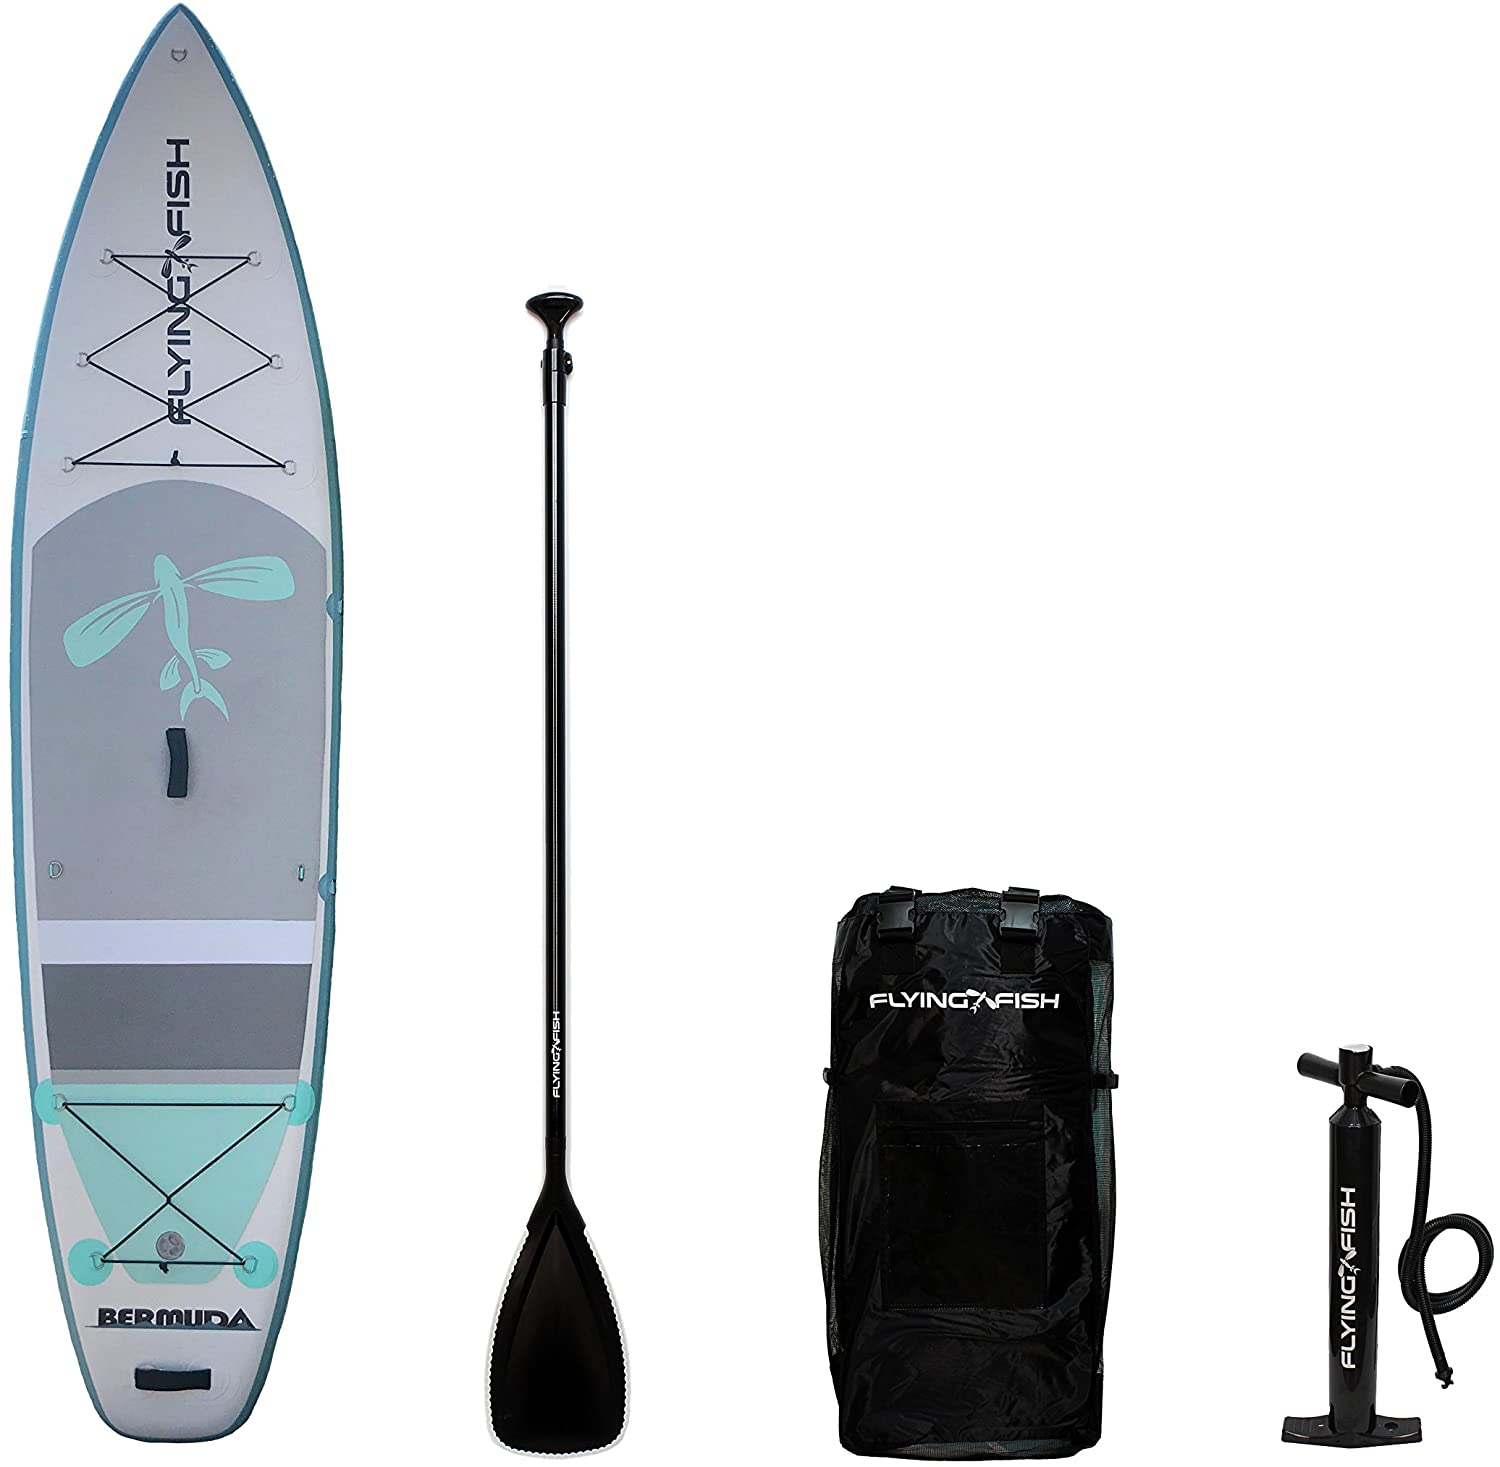 Flying Fish Bermuda Inflatable Stand Up Paddle Board SUP 